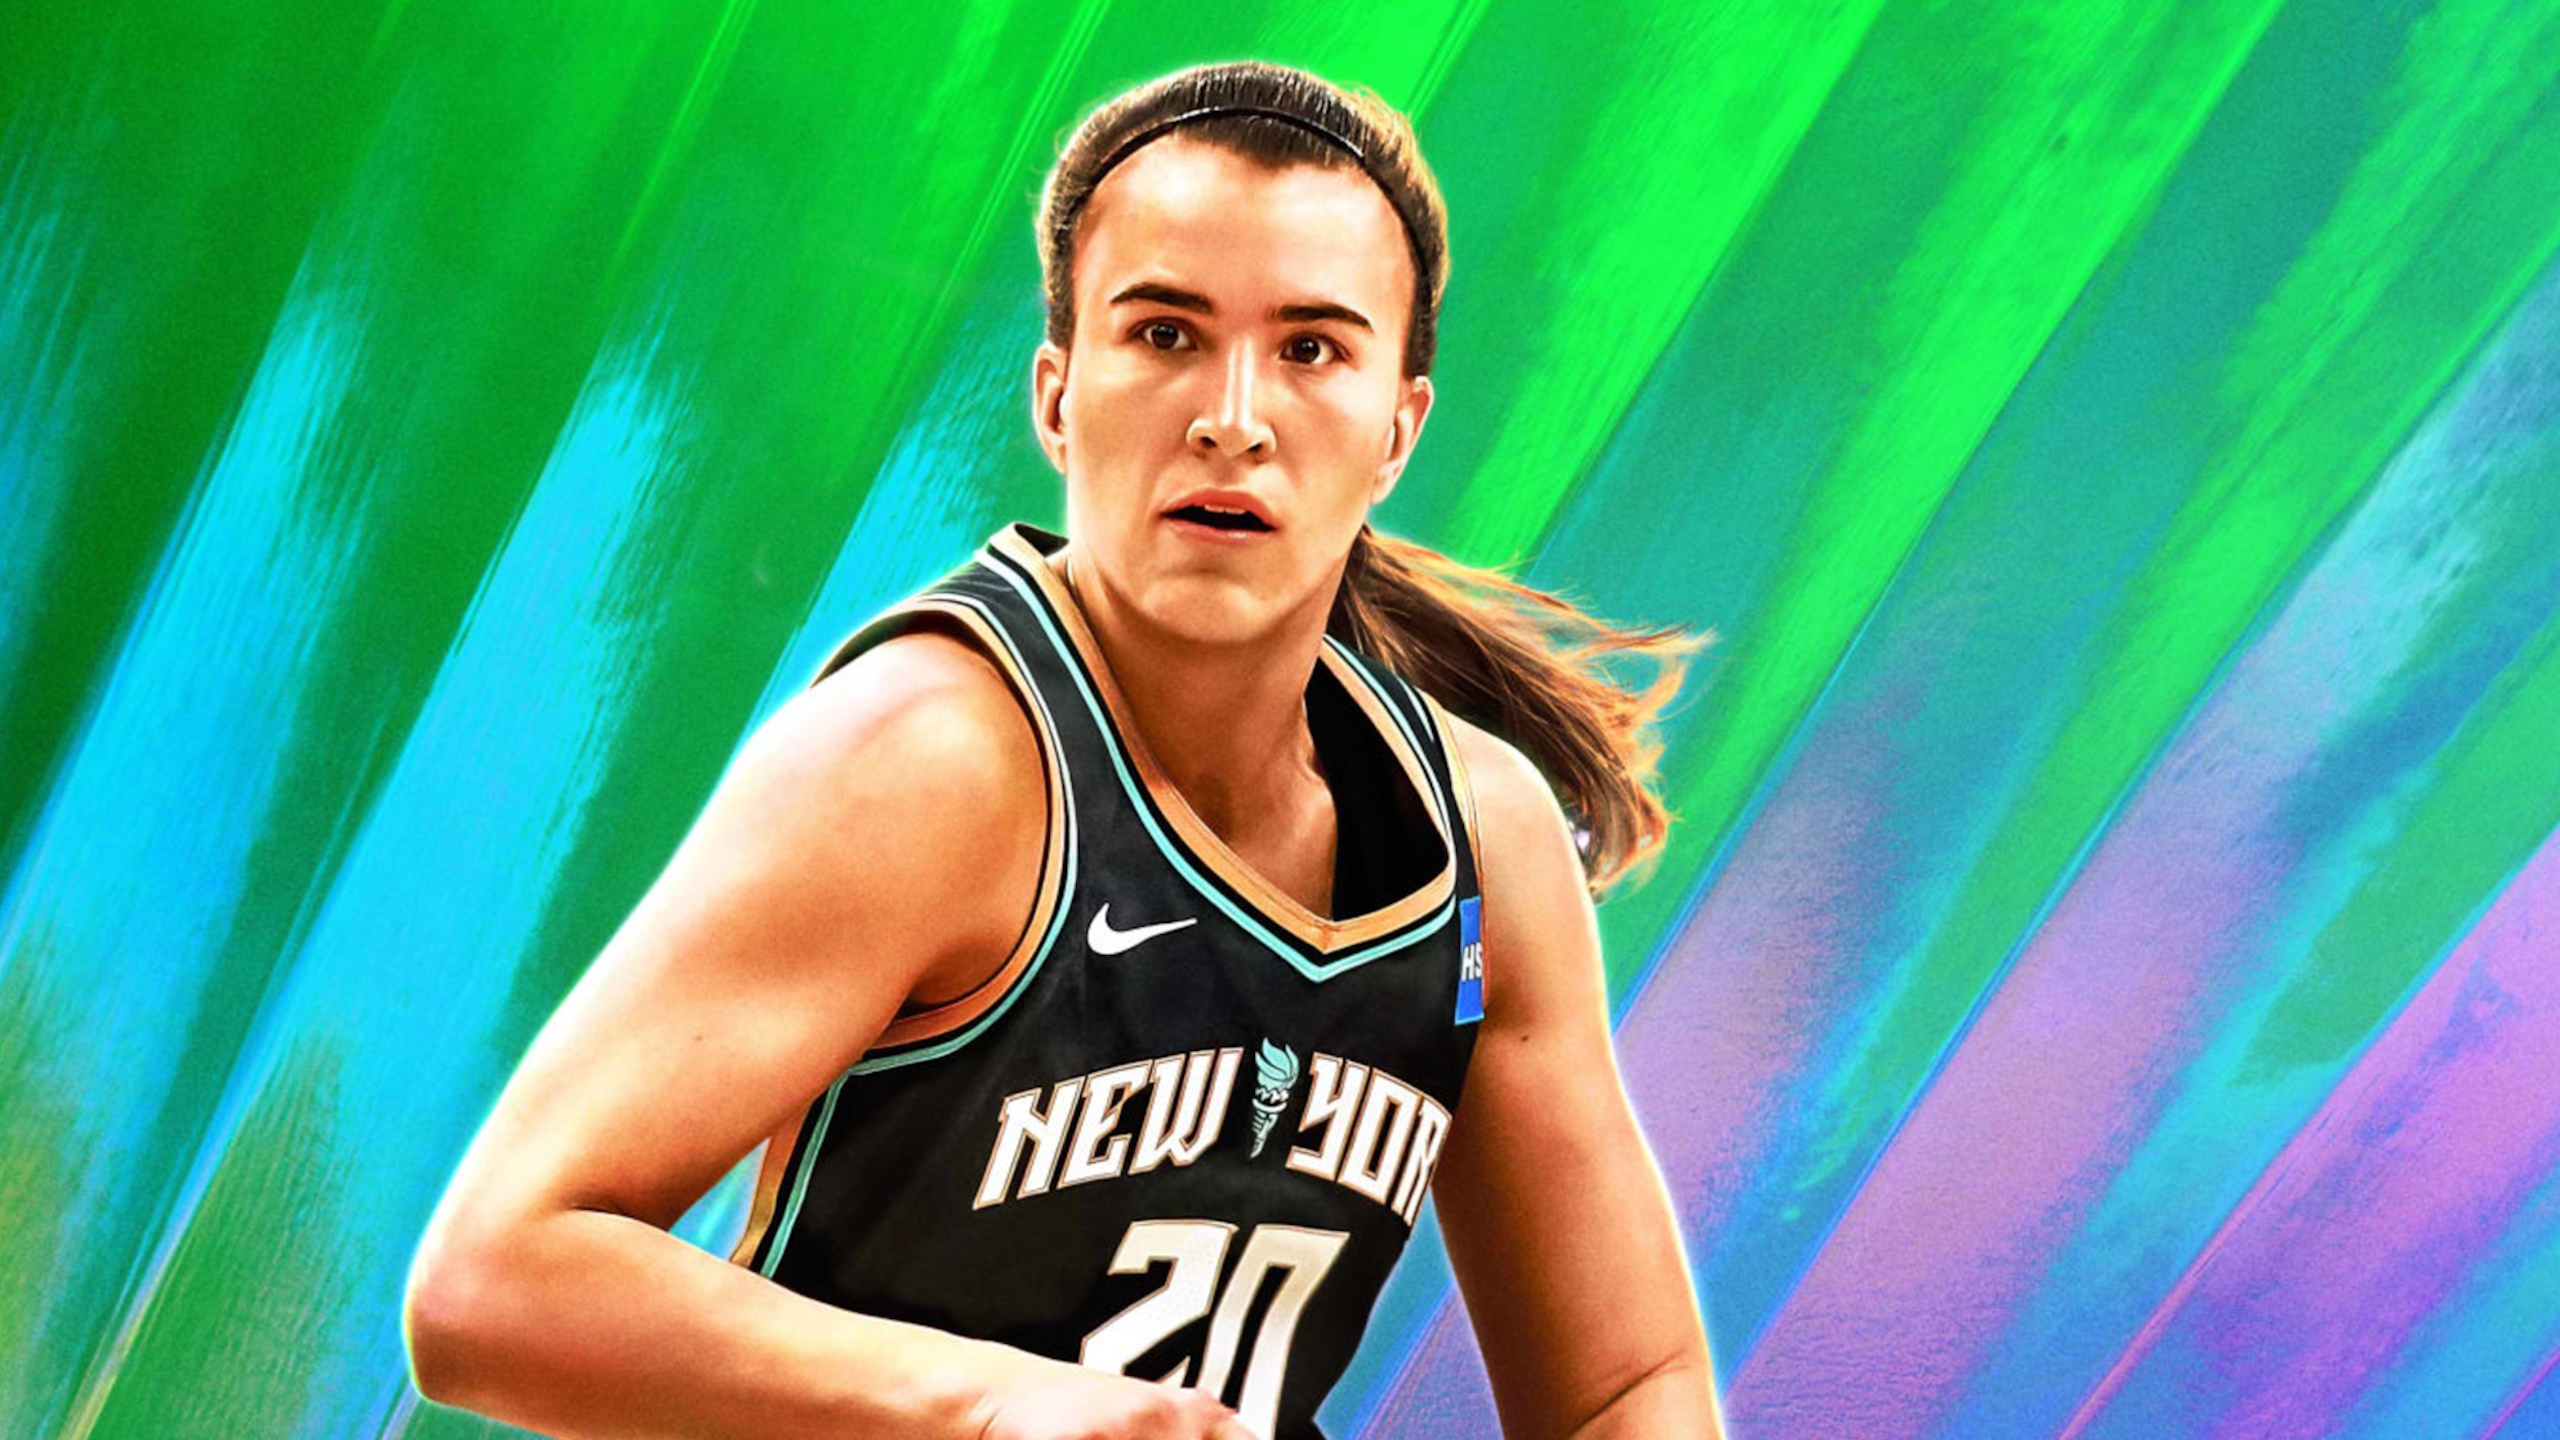 WNBA star Sabrina Ionescu, a white woman with brown hair in a ponytail, is depicted against a green and purple background, wearing a New York #20 jersey